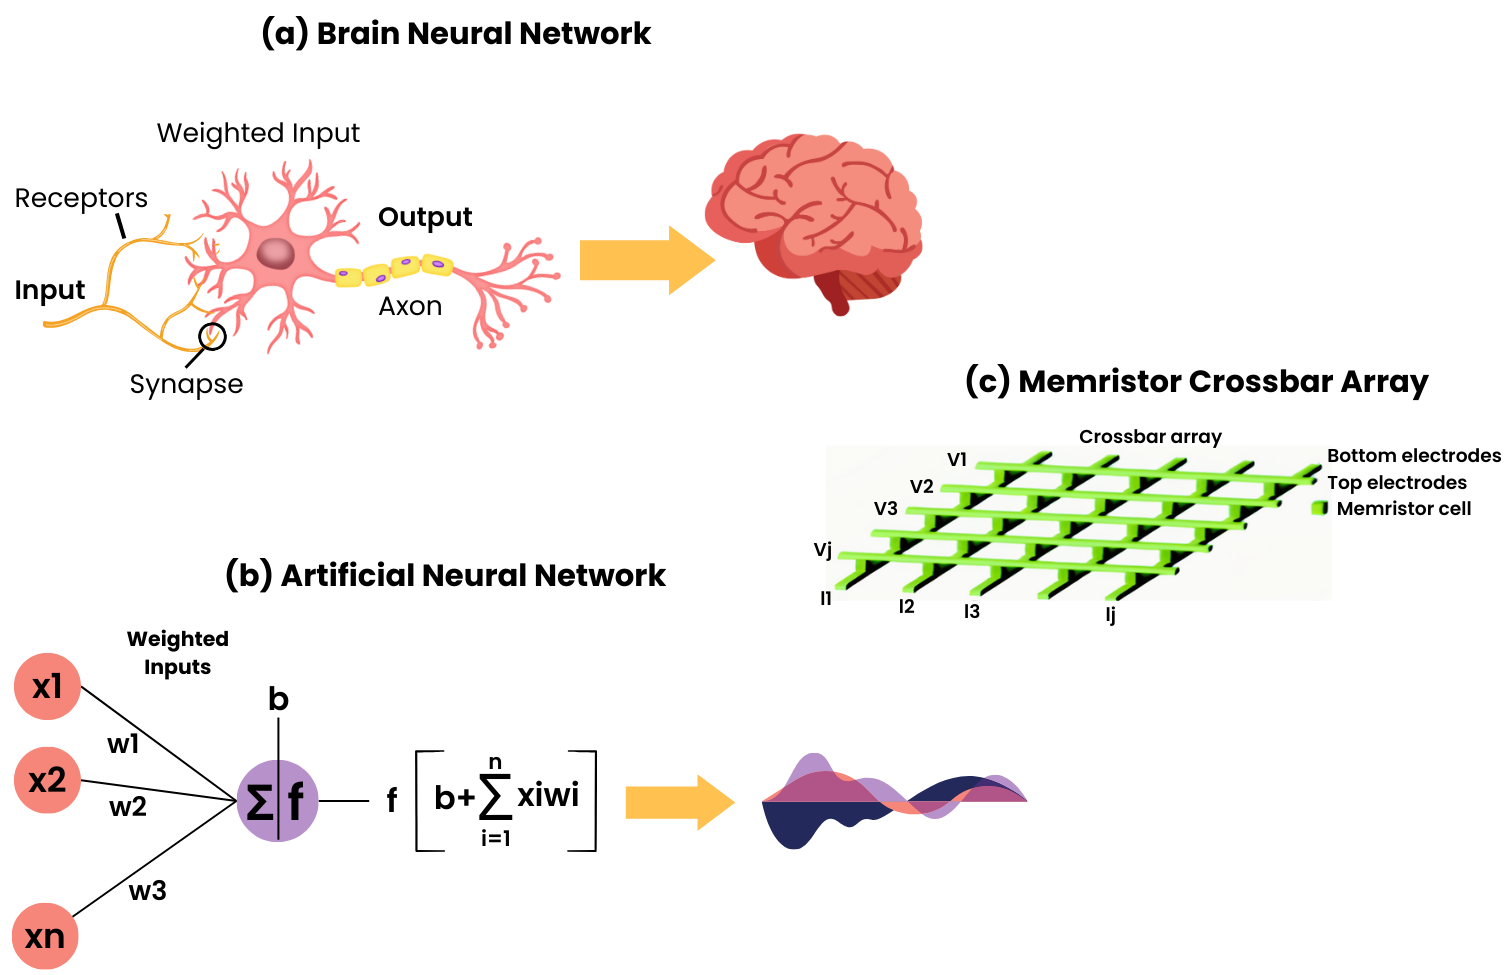 (a) Brain Neural Network (BNN) forms a complex computing network with billions of neurons. (b) Artificial Neural Network (ANN) uses Perceptron as a fundamental unit to mimic the computational model of the human brain.  (c) Many neuromorphic chips use